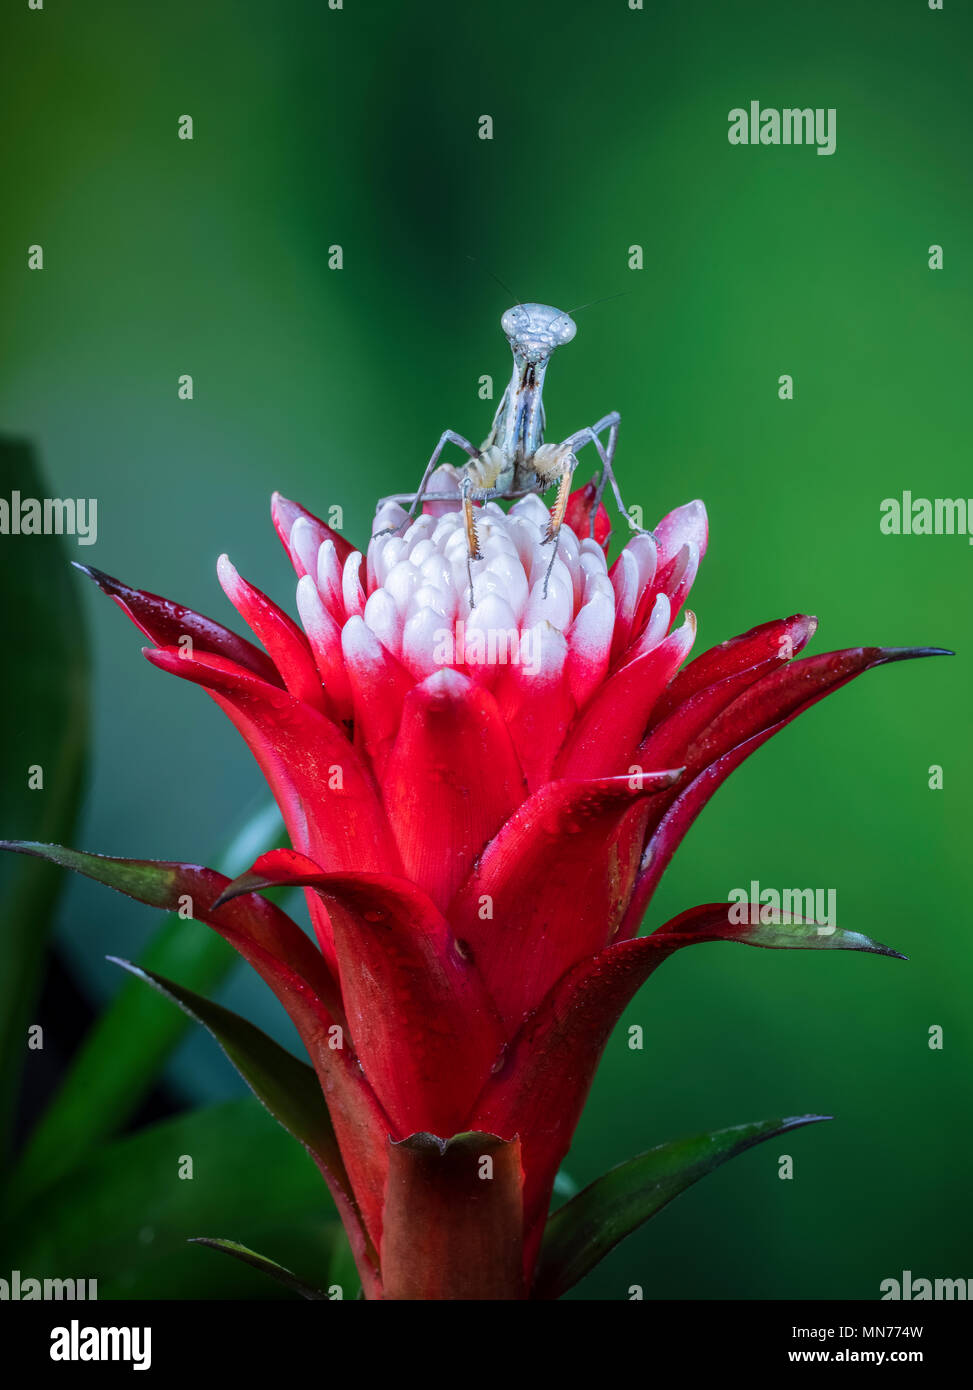 Praying Mantis insect on red and white flower portrait format Stock Photo